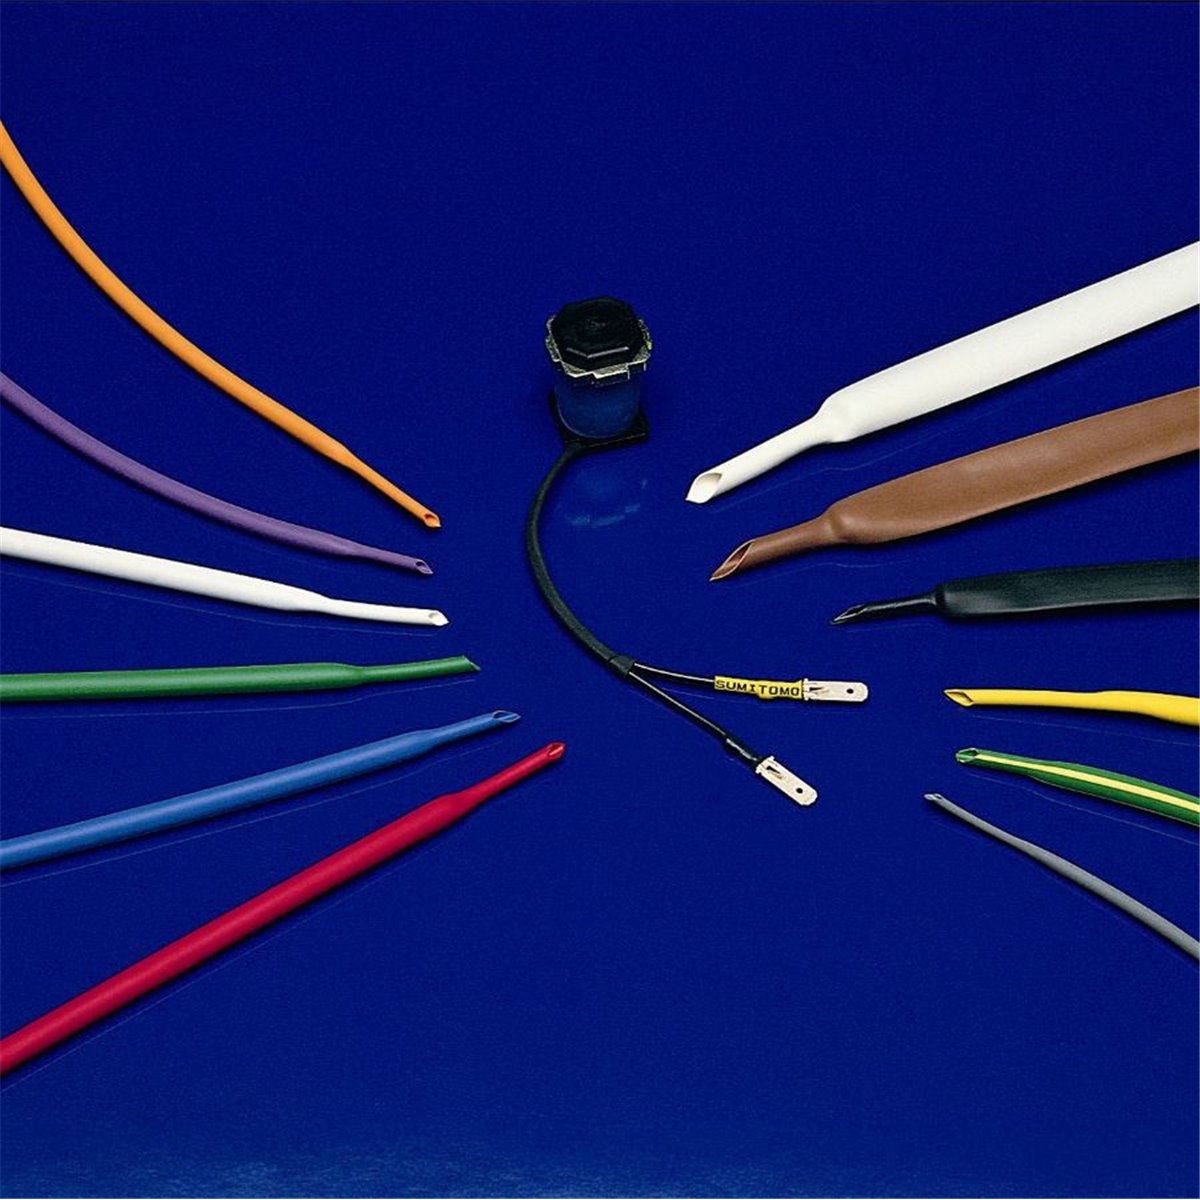 SUMITUBE B2 3/16" (4.8/2.4 mm) heat shrinkable tubing, red, 60 m package by Sumitomo.